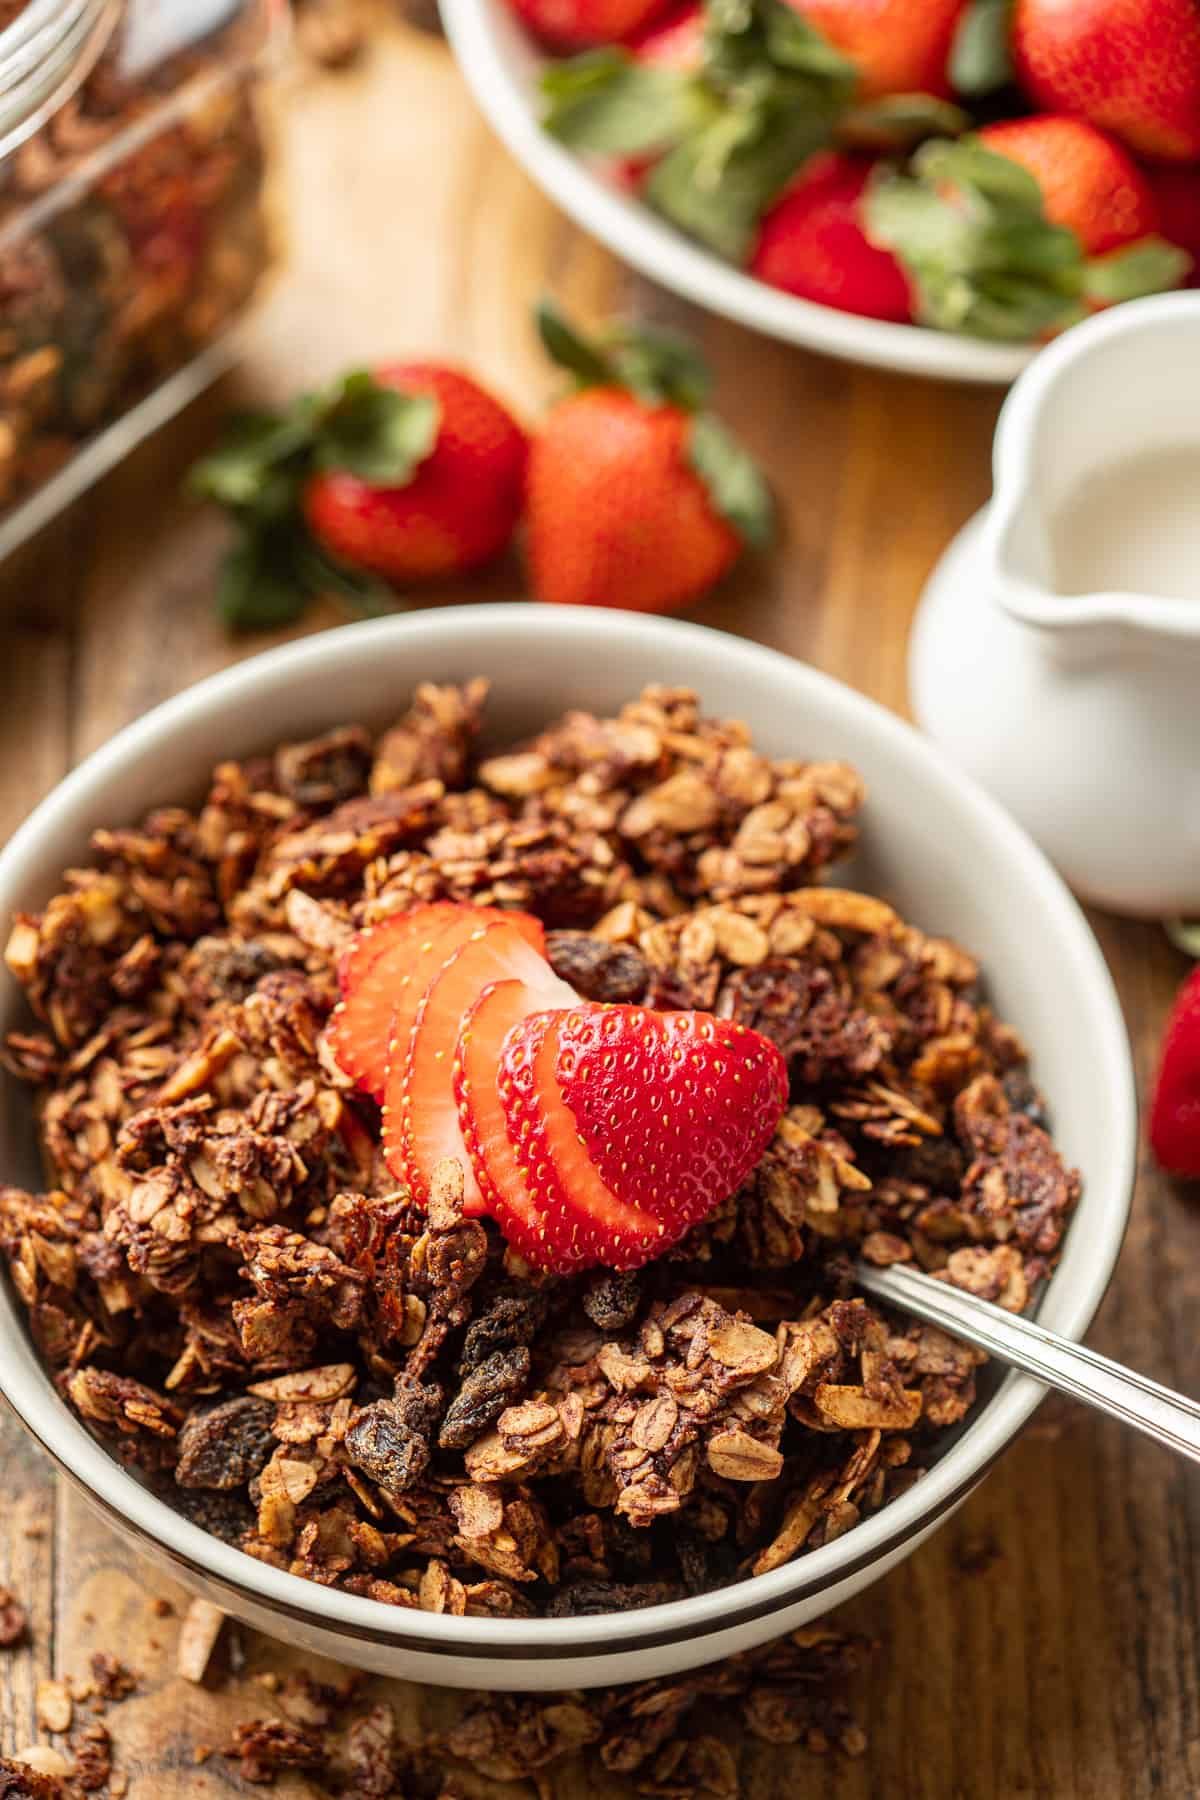 Bowl of Chocolate Granola with almond milk and strawberries in the background.